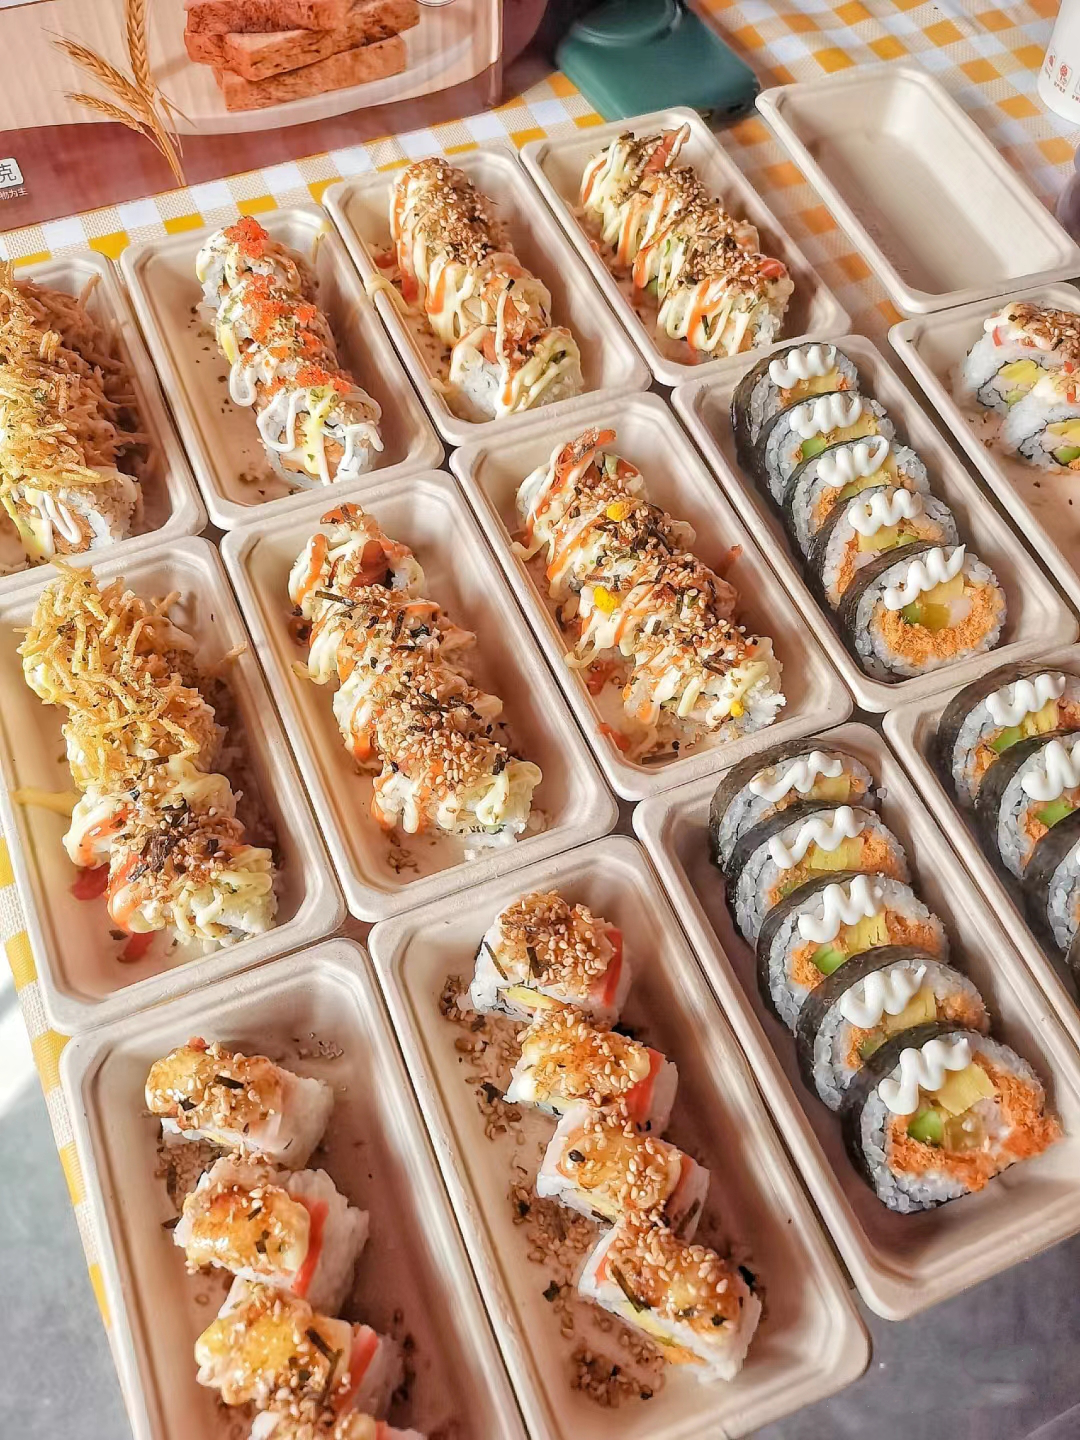 sushi packaging containers bring added value to sushi